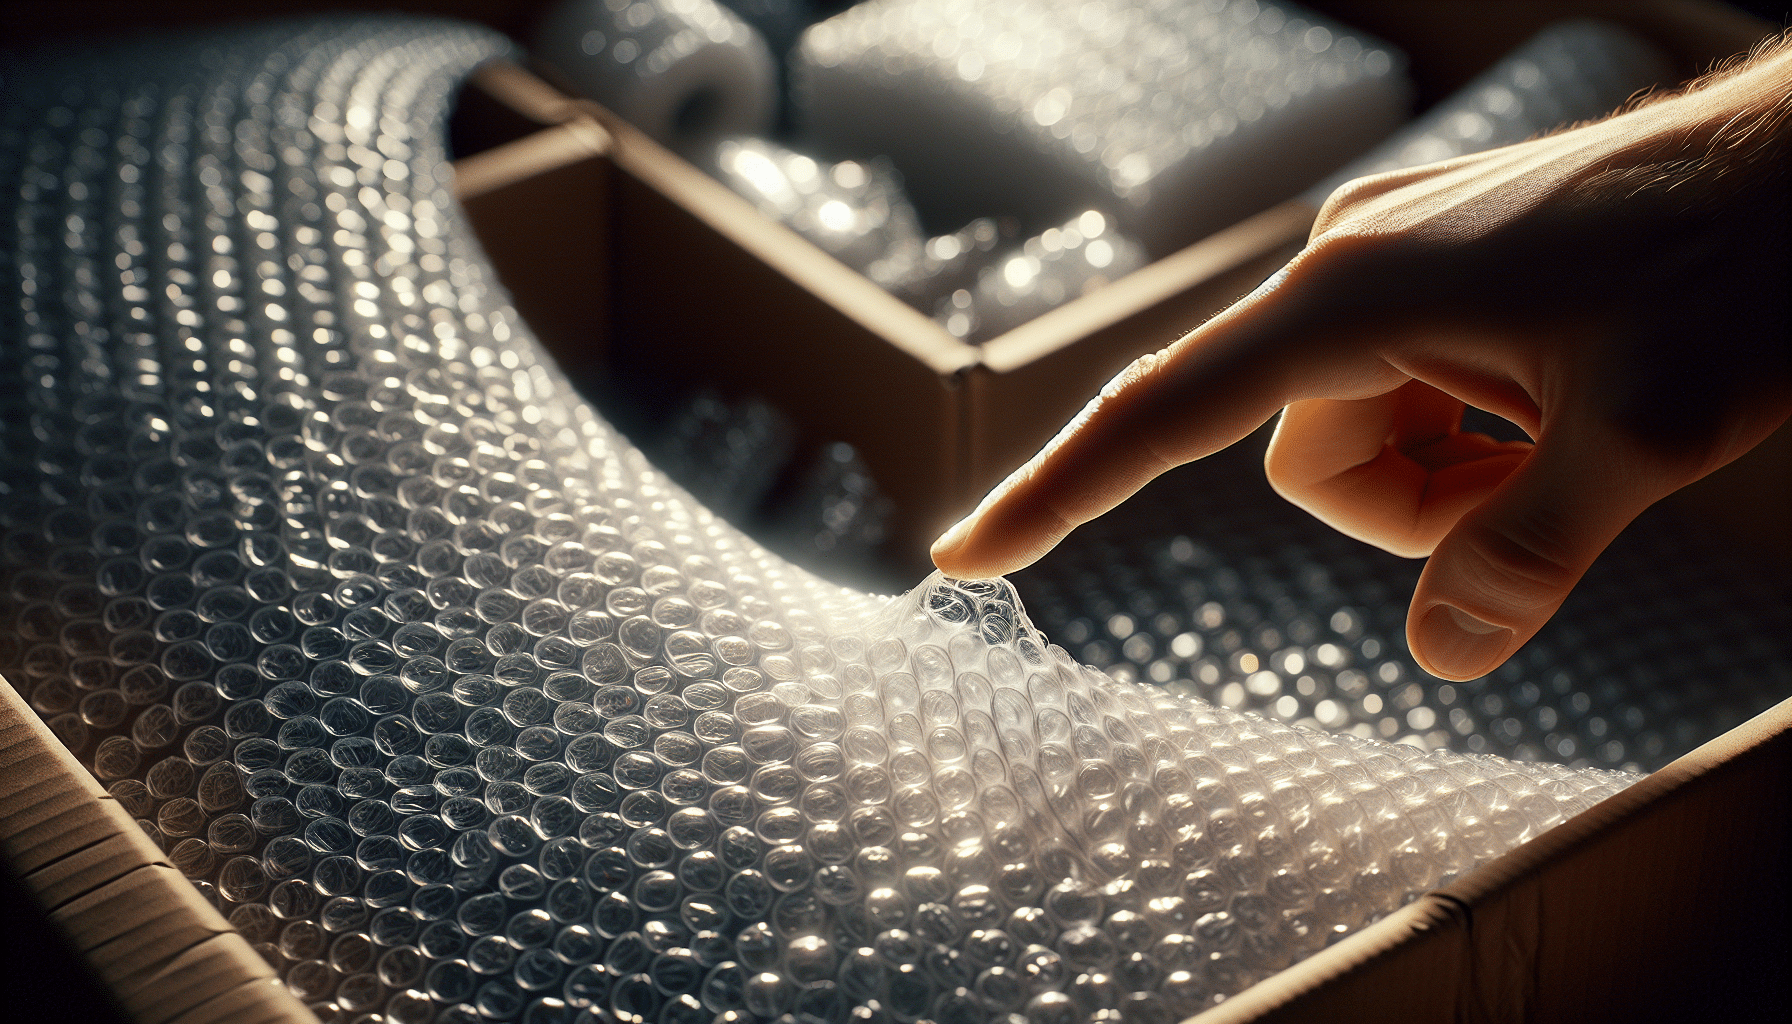 Captivating moment of bubble wrap pop, function meets fun